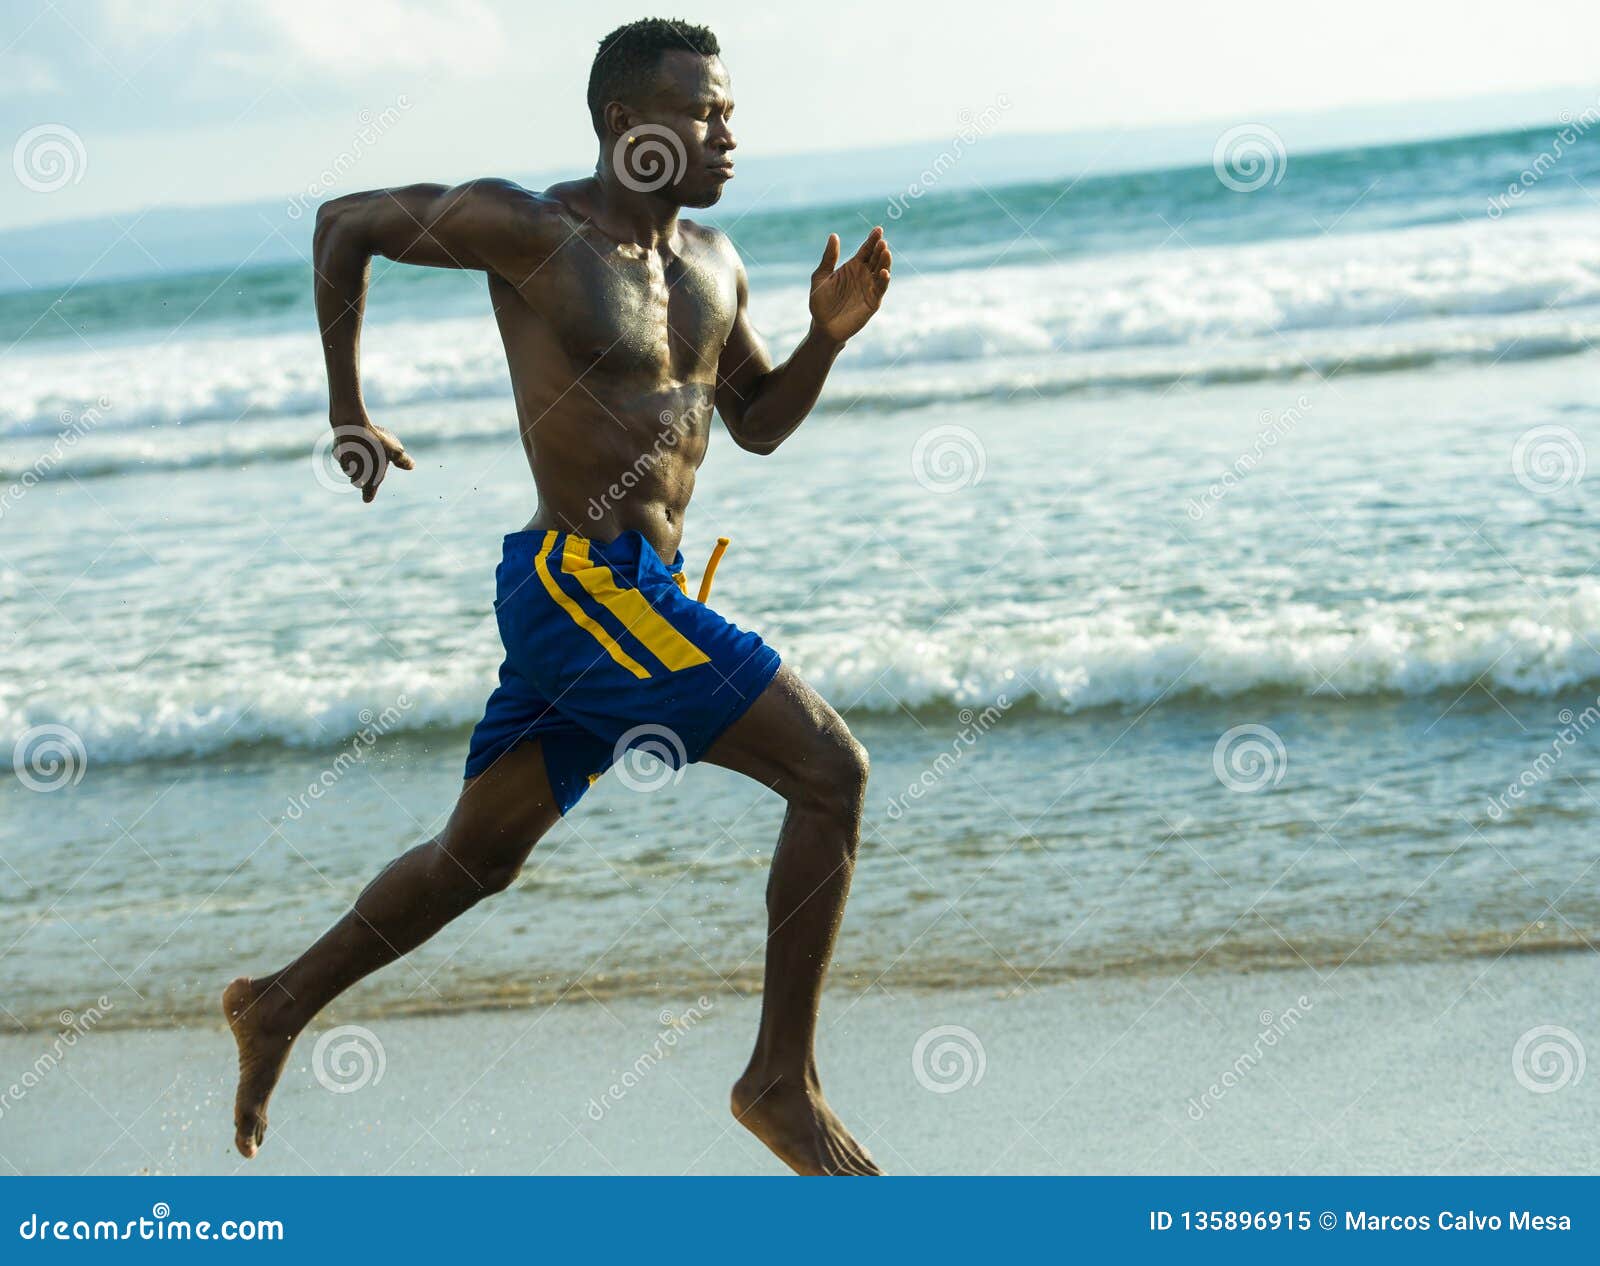 Young Attractive Fit Athletic and Strong Black African American Man Running at the Beach Training Hard and Sprinting on Sea Water Stock Image pic picture